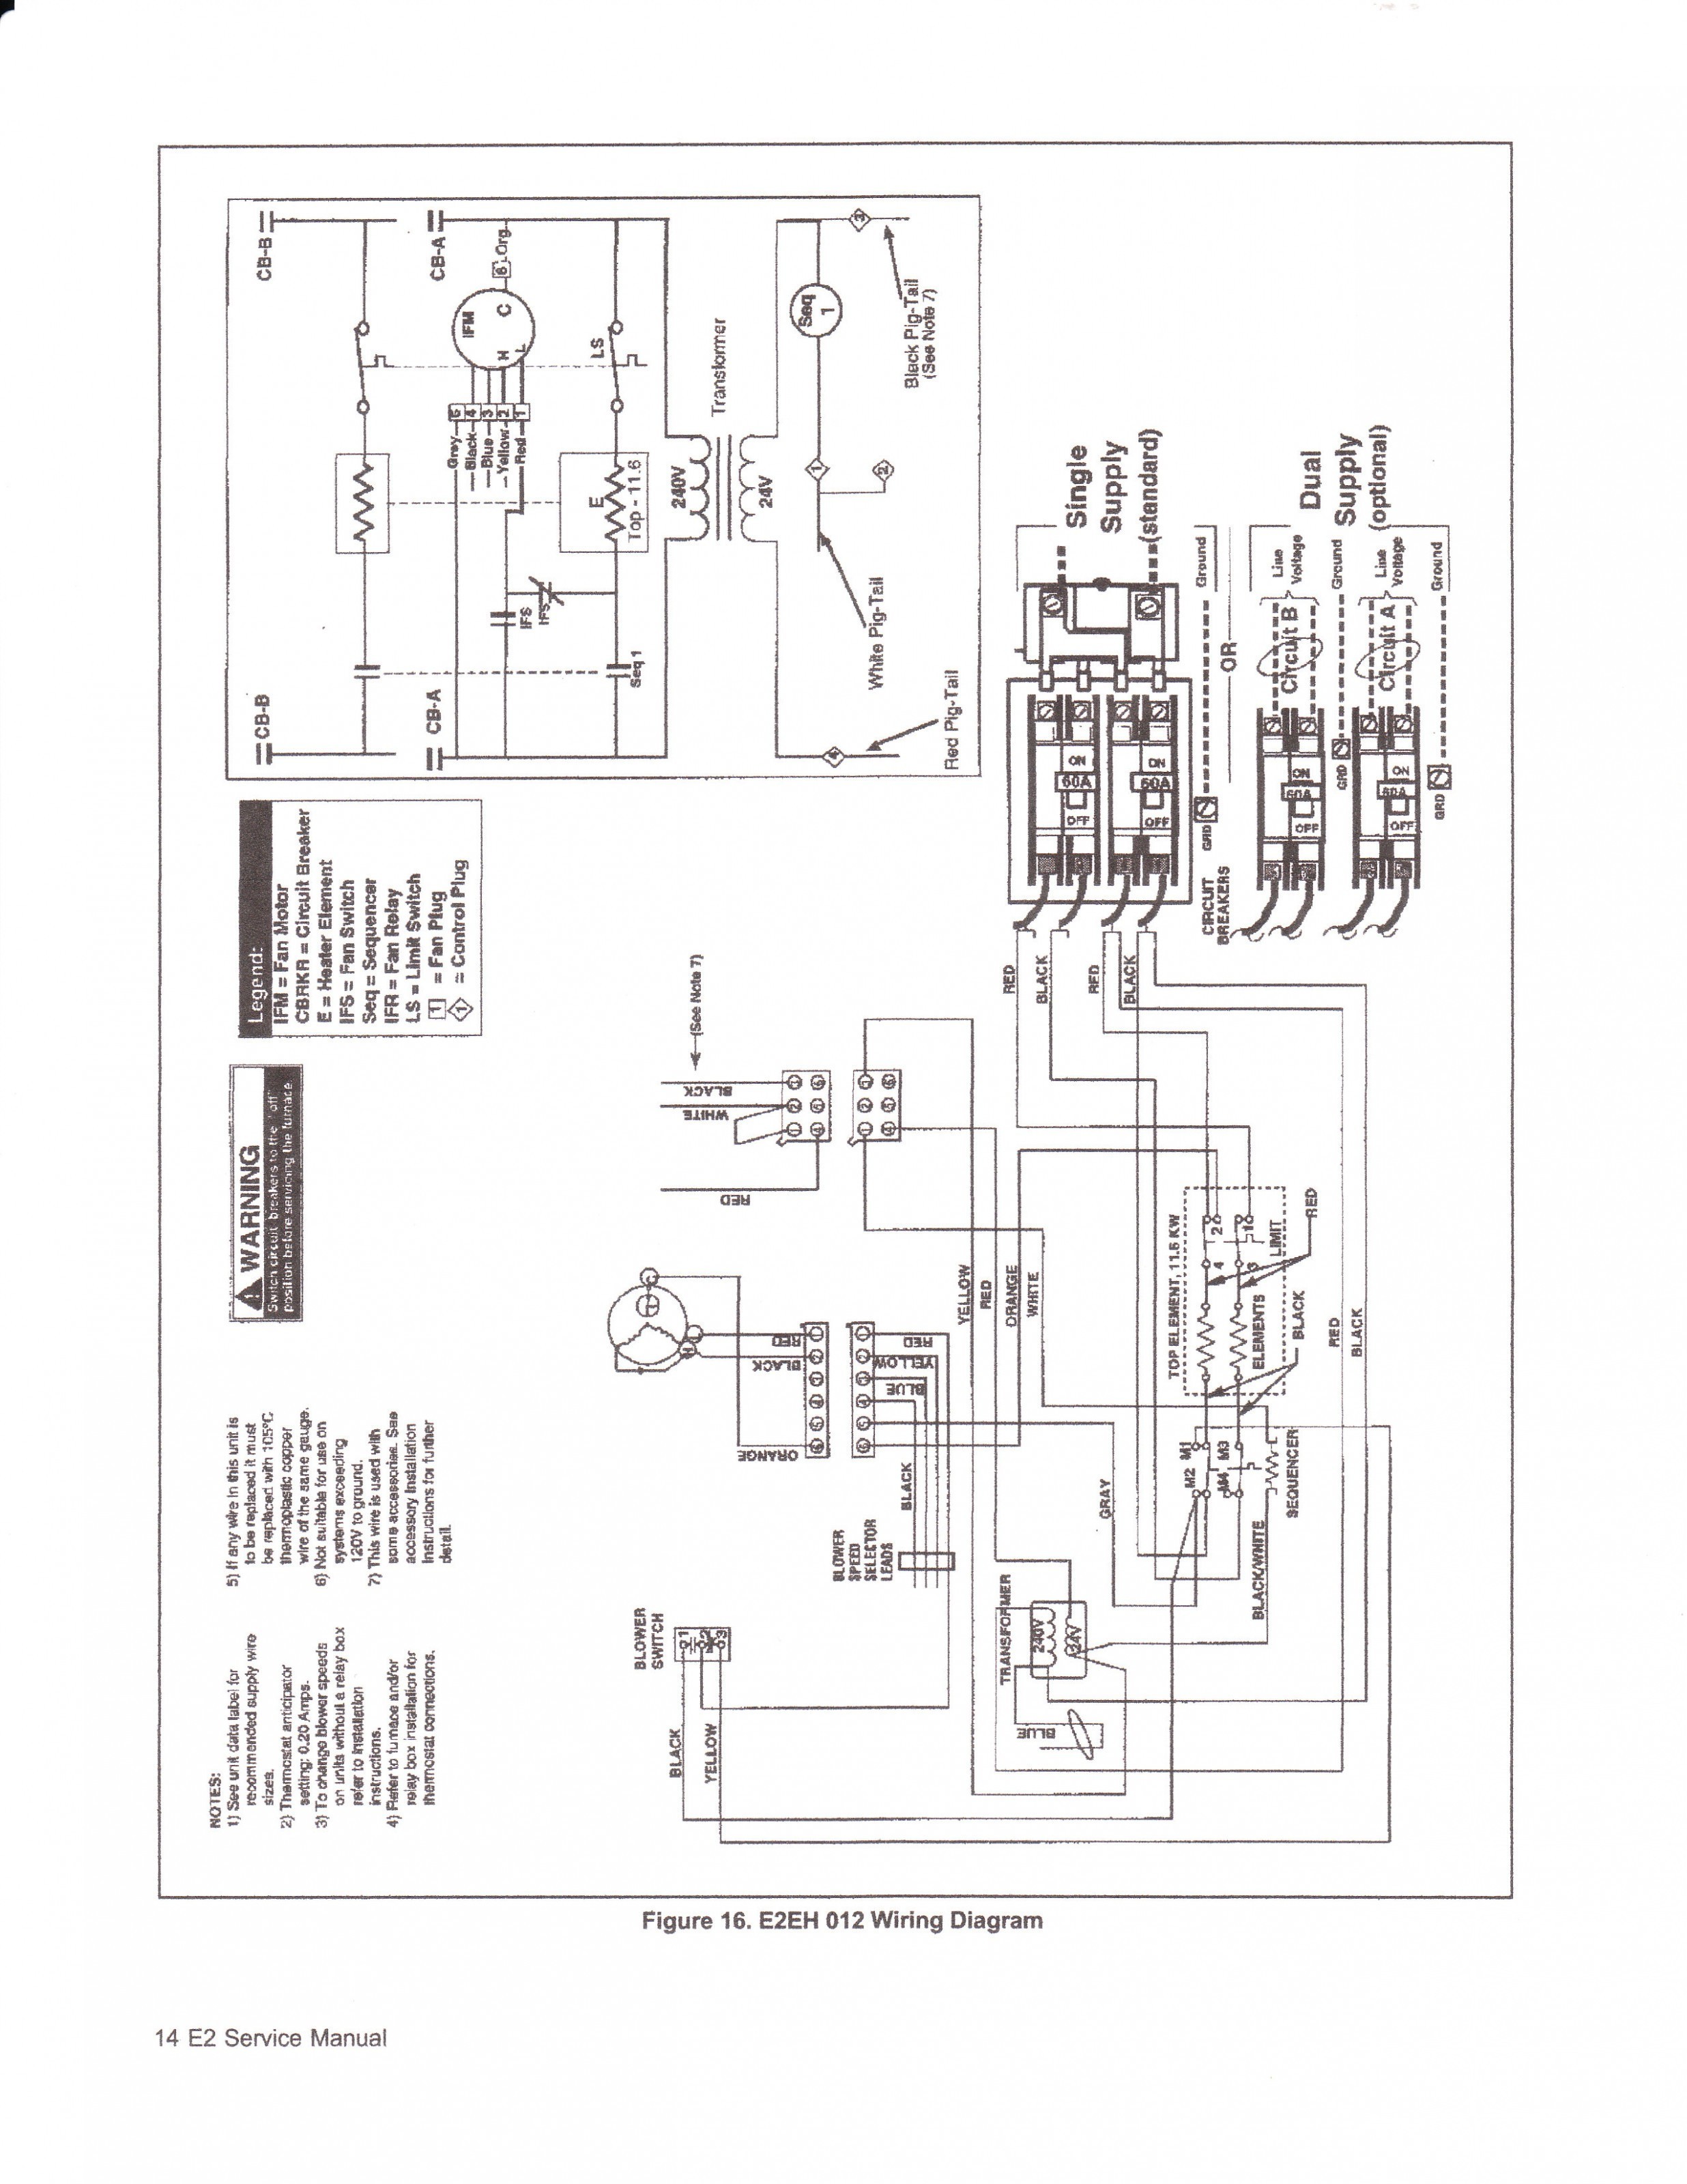 Armstrong Furnace Parts Diagram Gas Furnace thermocouple Wiring Diagram Inspirational Payne Gas Of Armstrong Furnace Parts Diagram